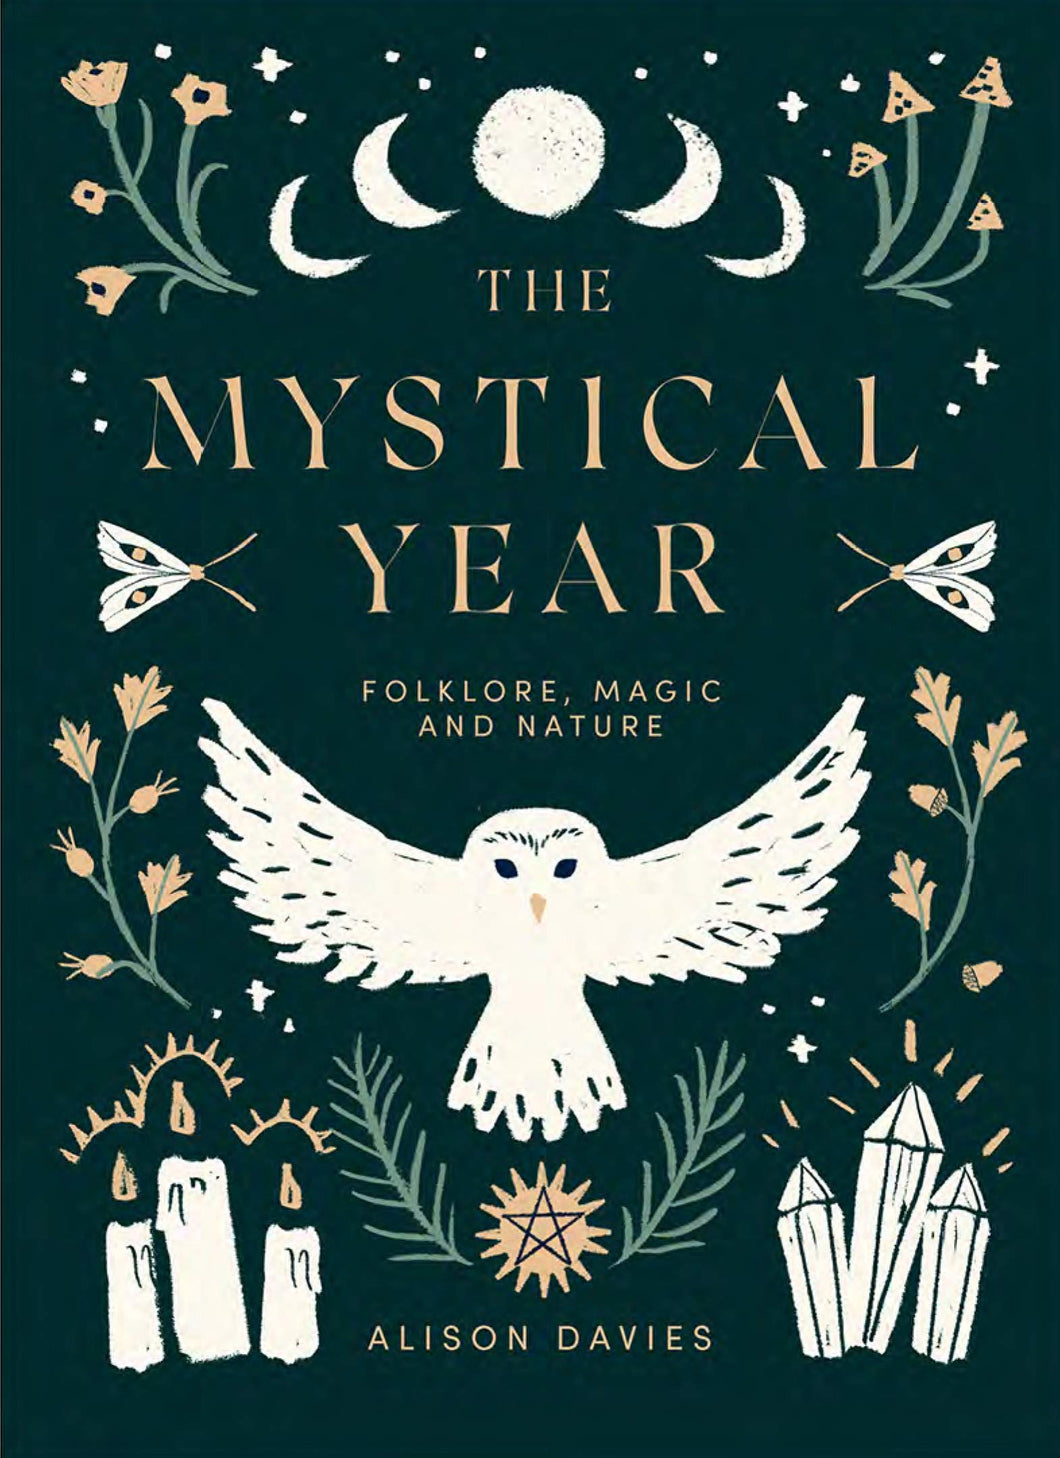 The Mystical Year by Alison Davies